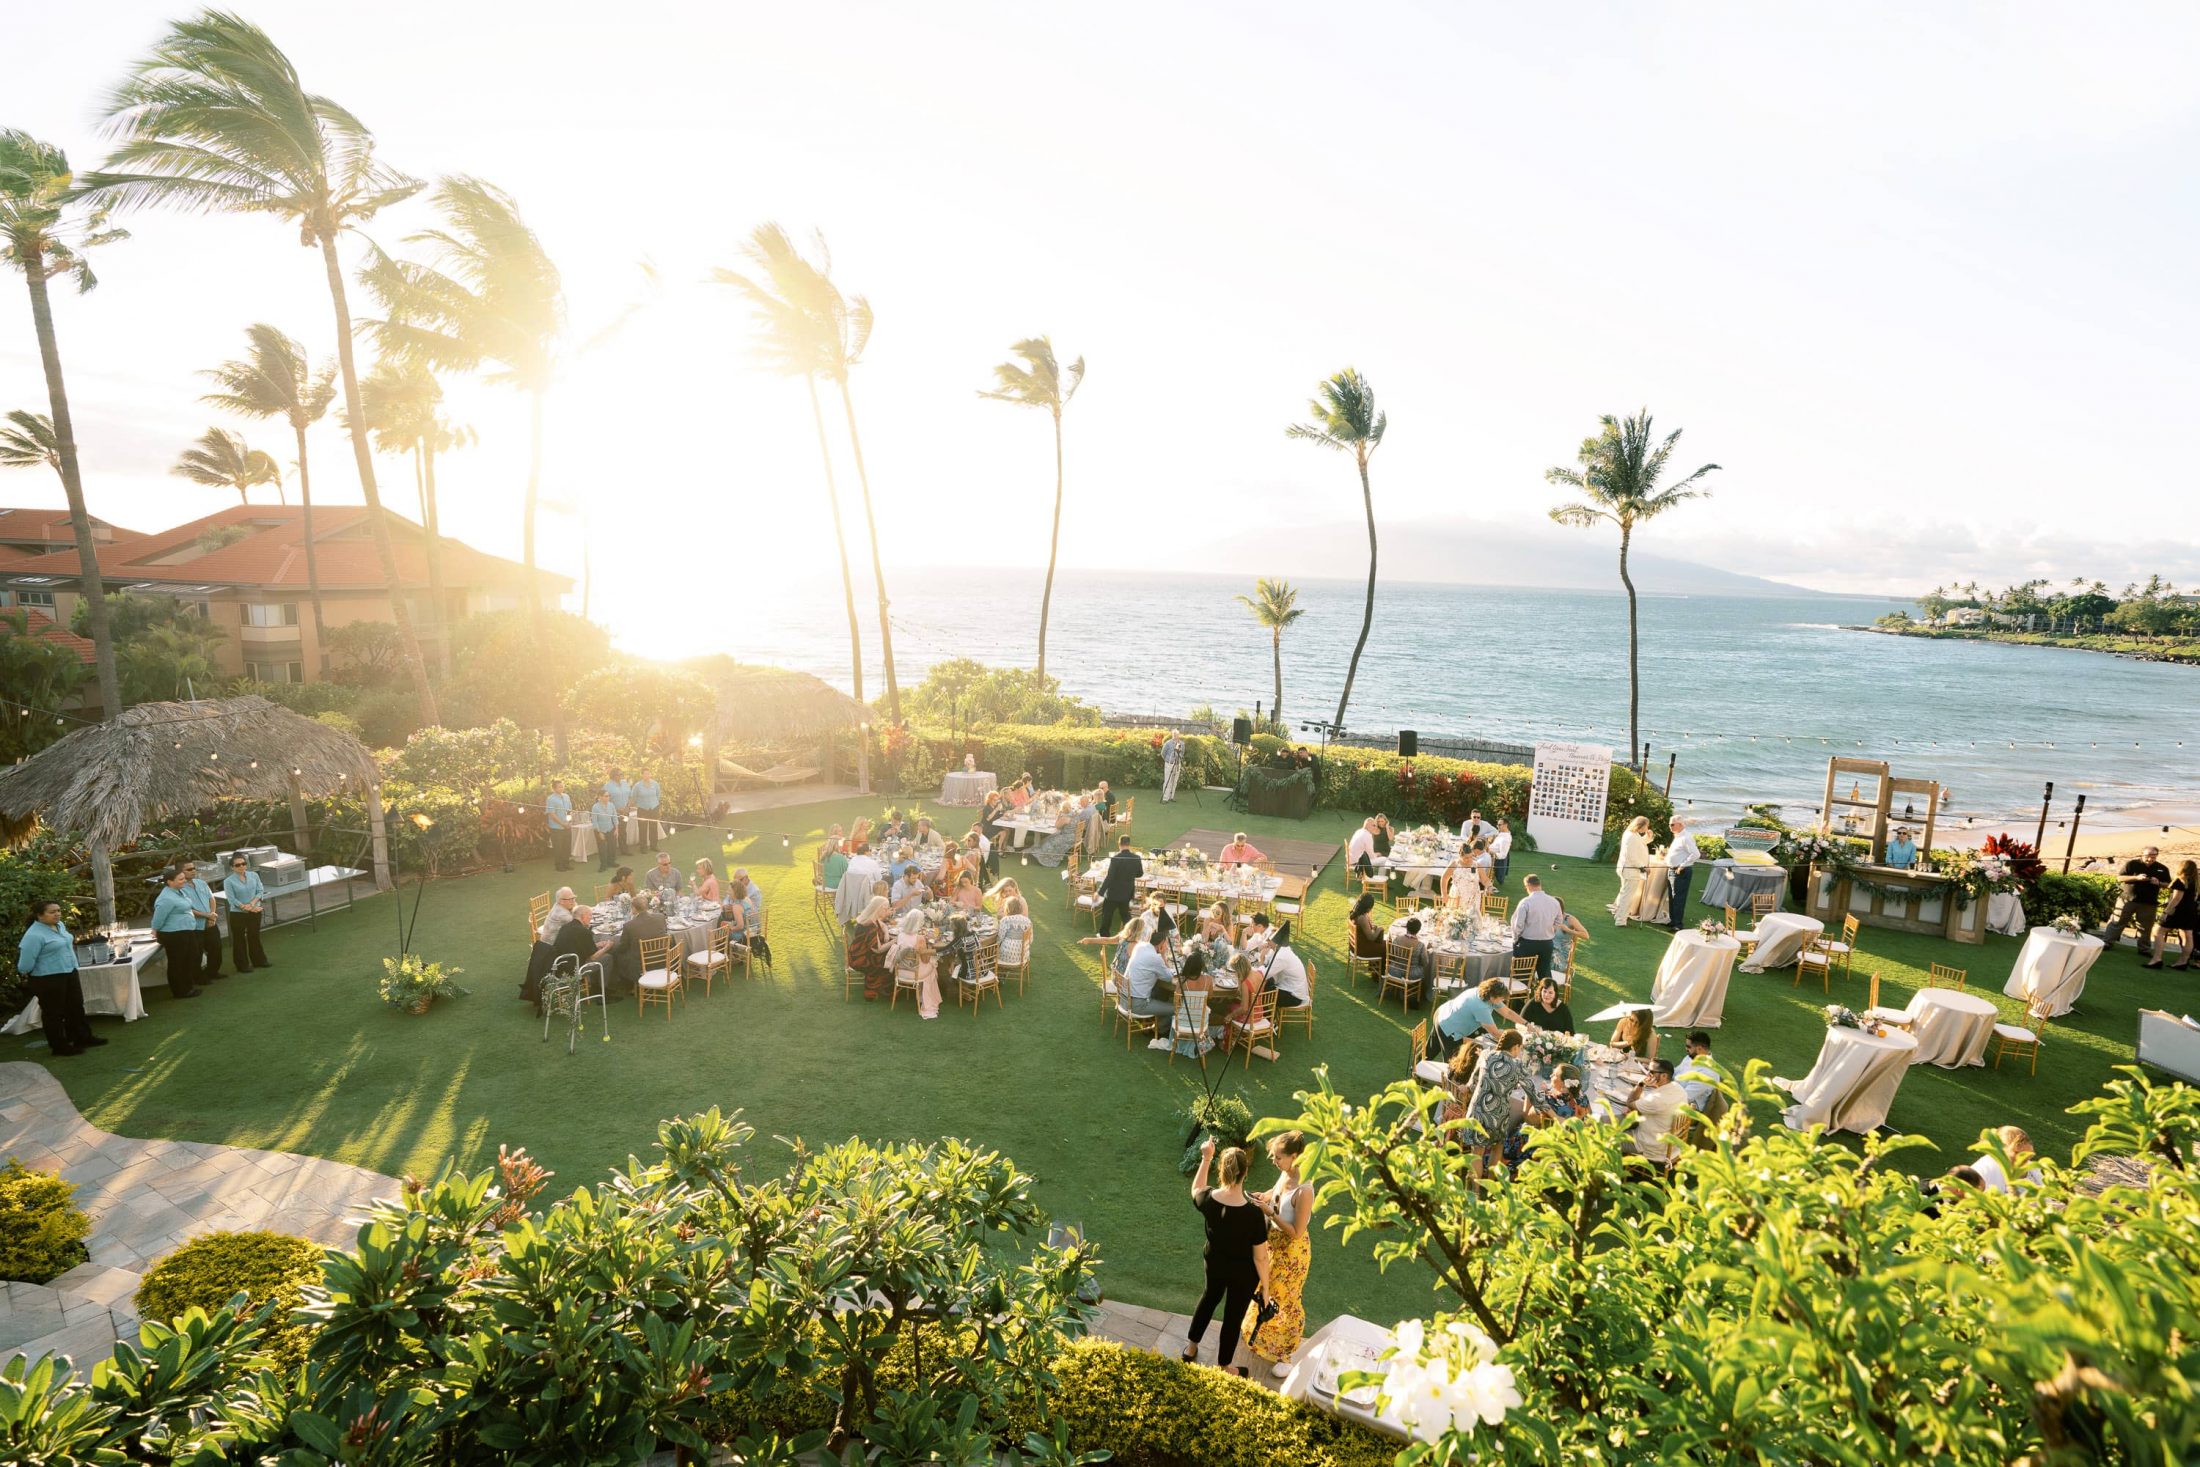 Guests at reception during sunset overlooking the Pacific Ocean at Maui wedding at Four Seasons Resort Maui in Wailea, Hawaii | Photo by James x Schulze